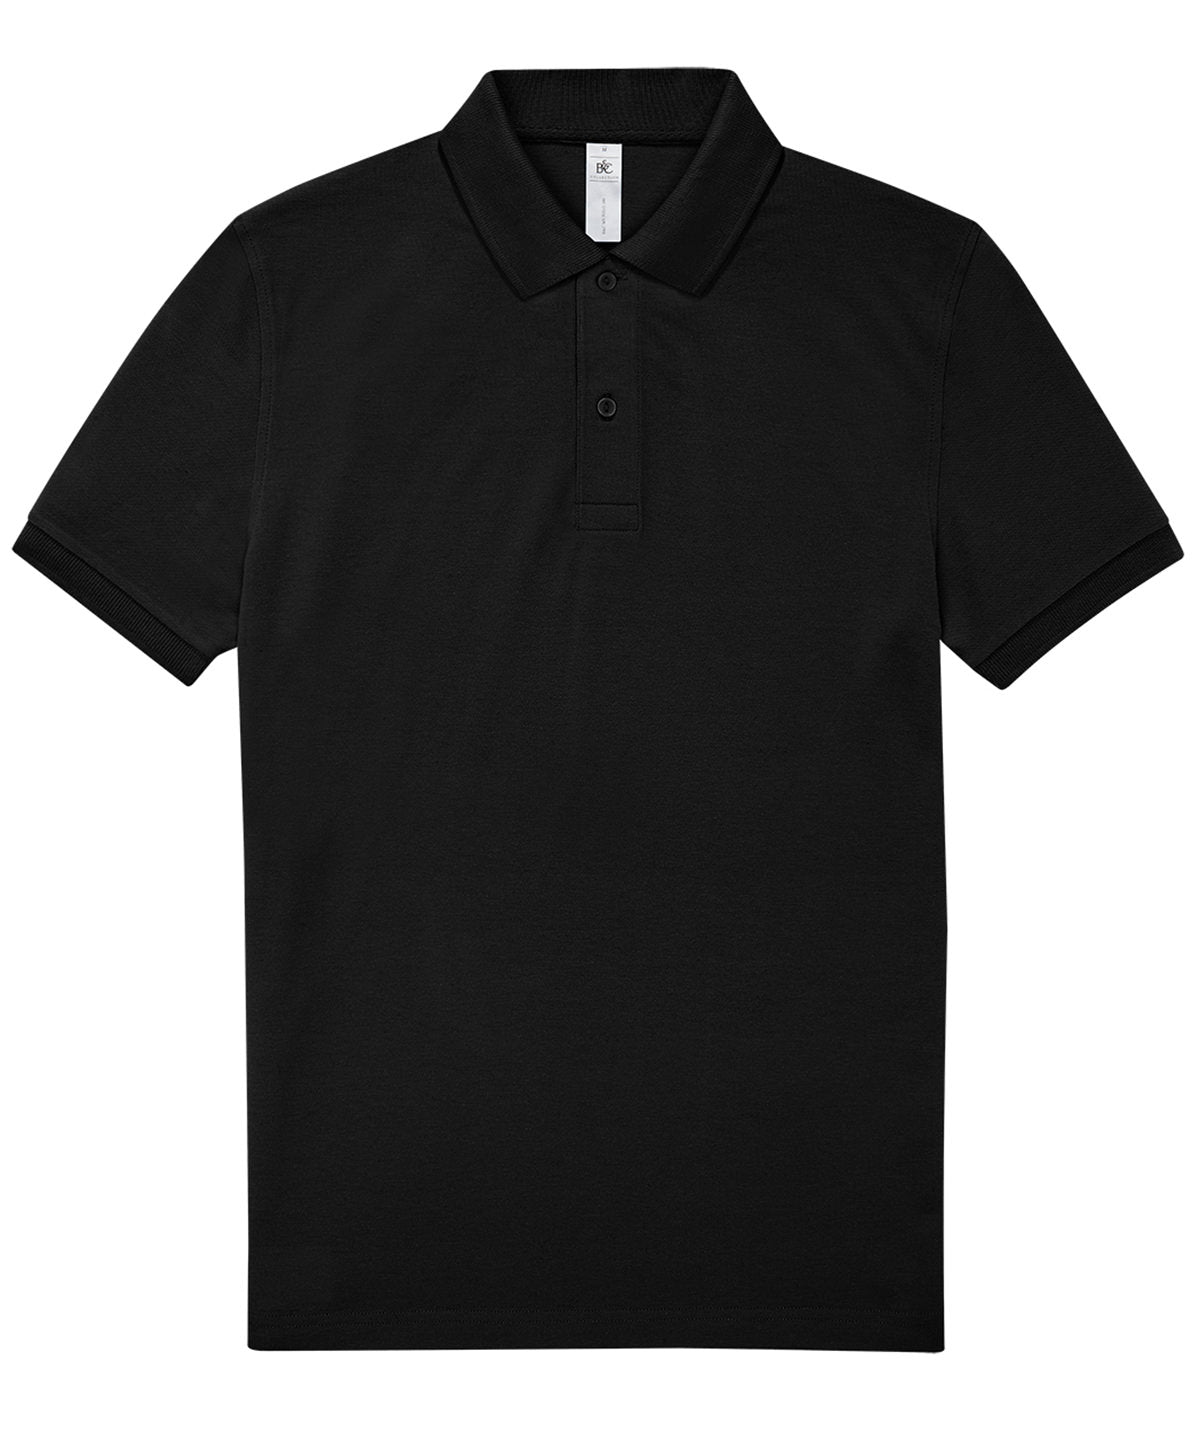 Personalised Polo Shirts - Navy B&C Collection B&C My Polo 180